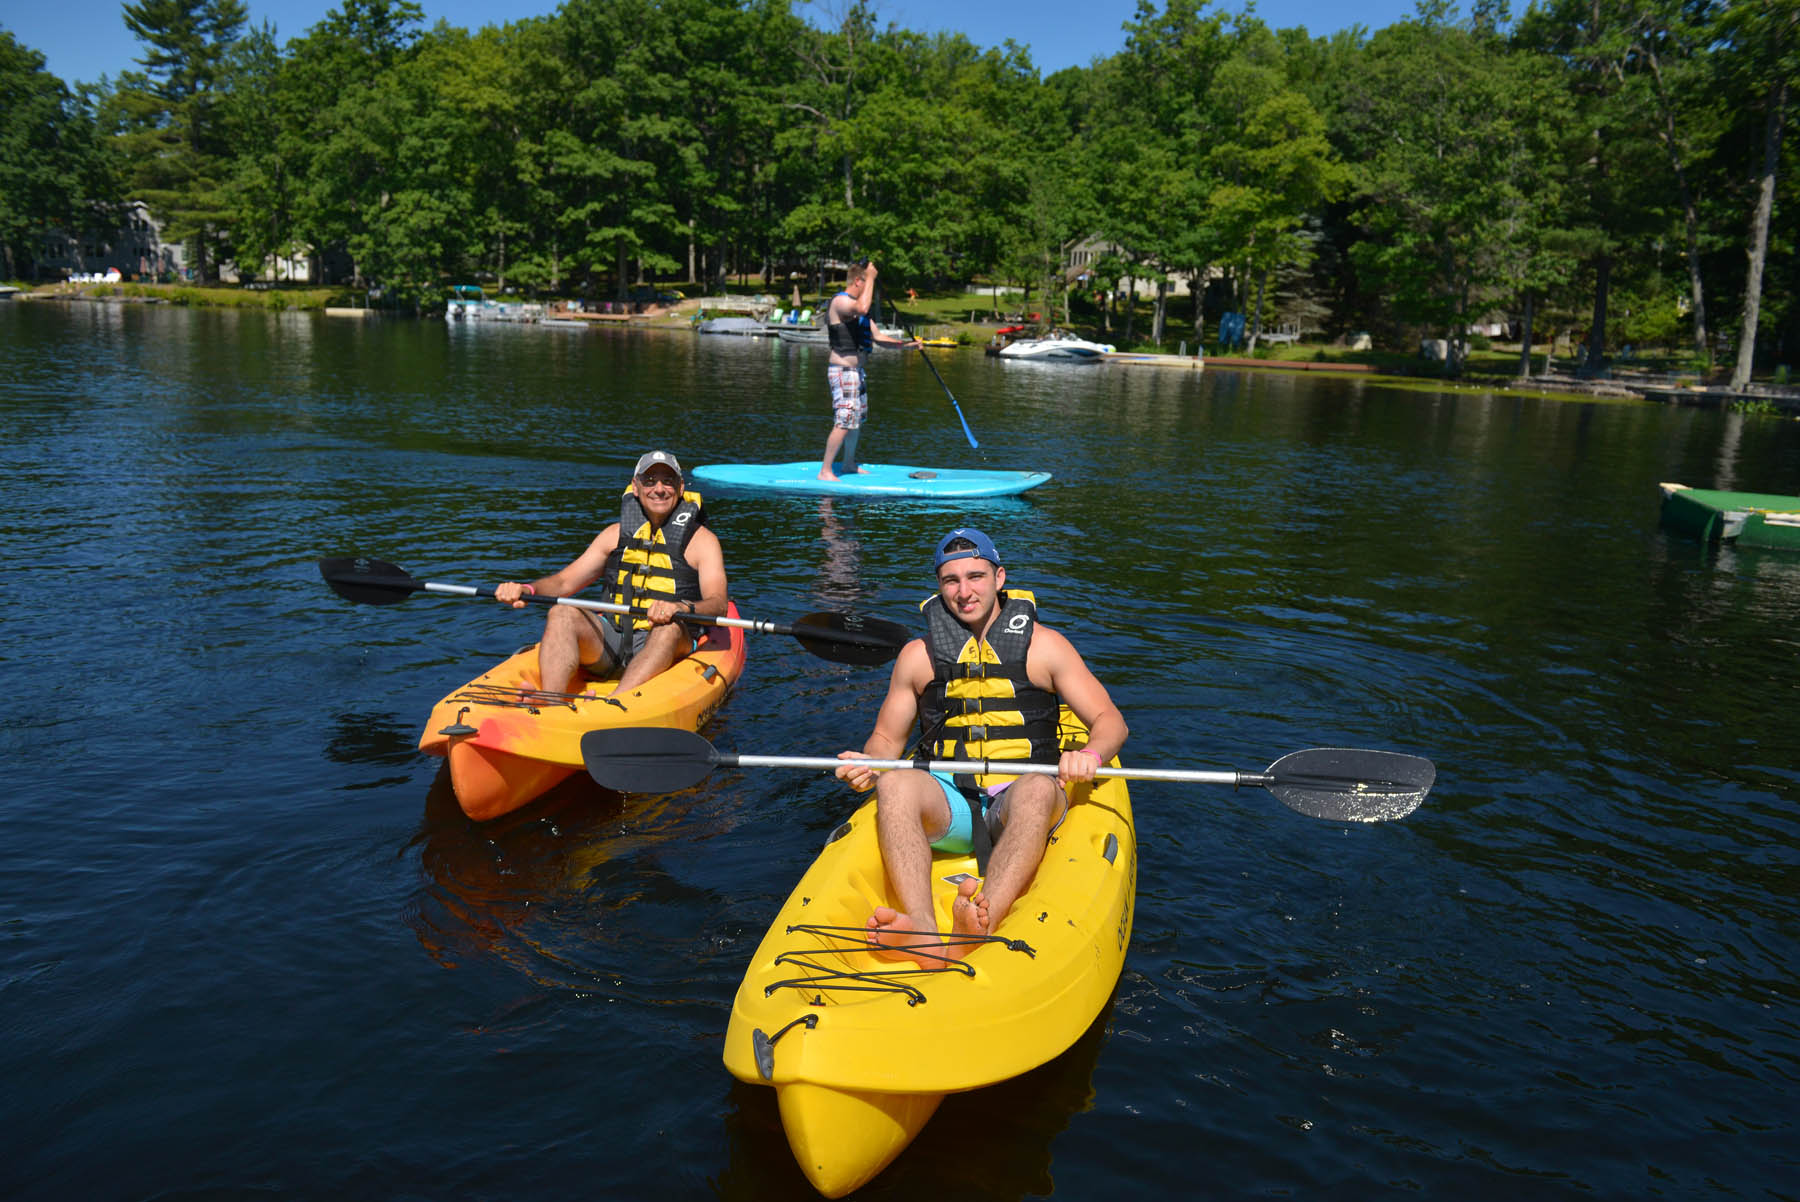 Guests on the lake in kayaks and a standup paddleboard.